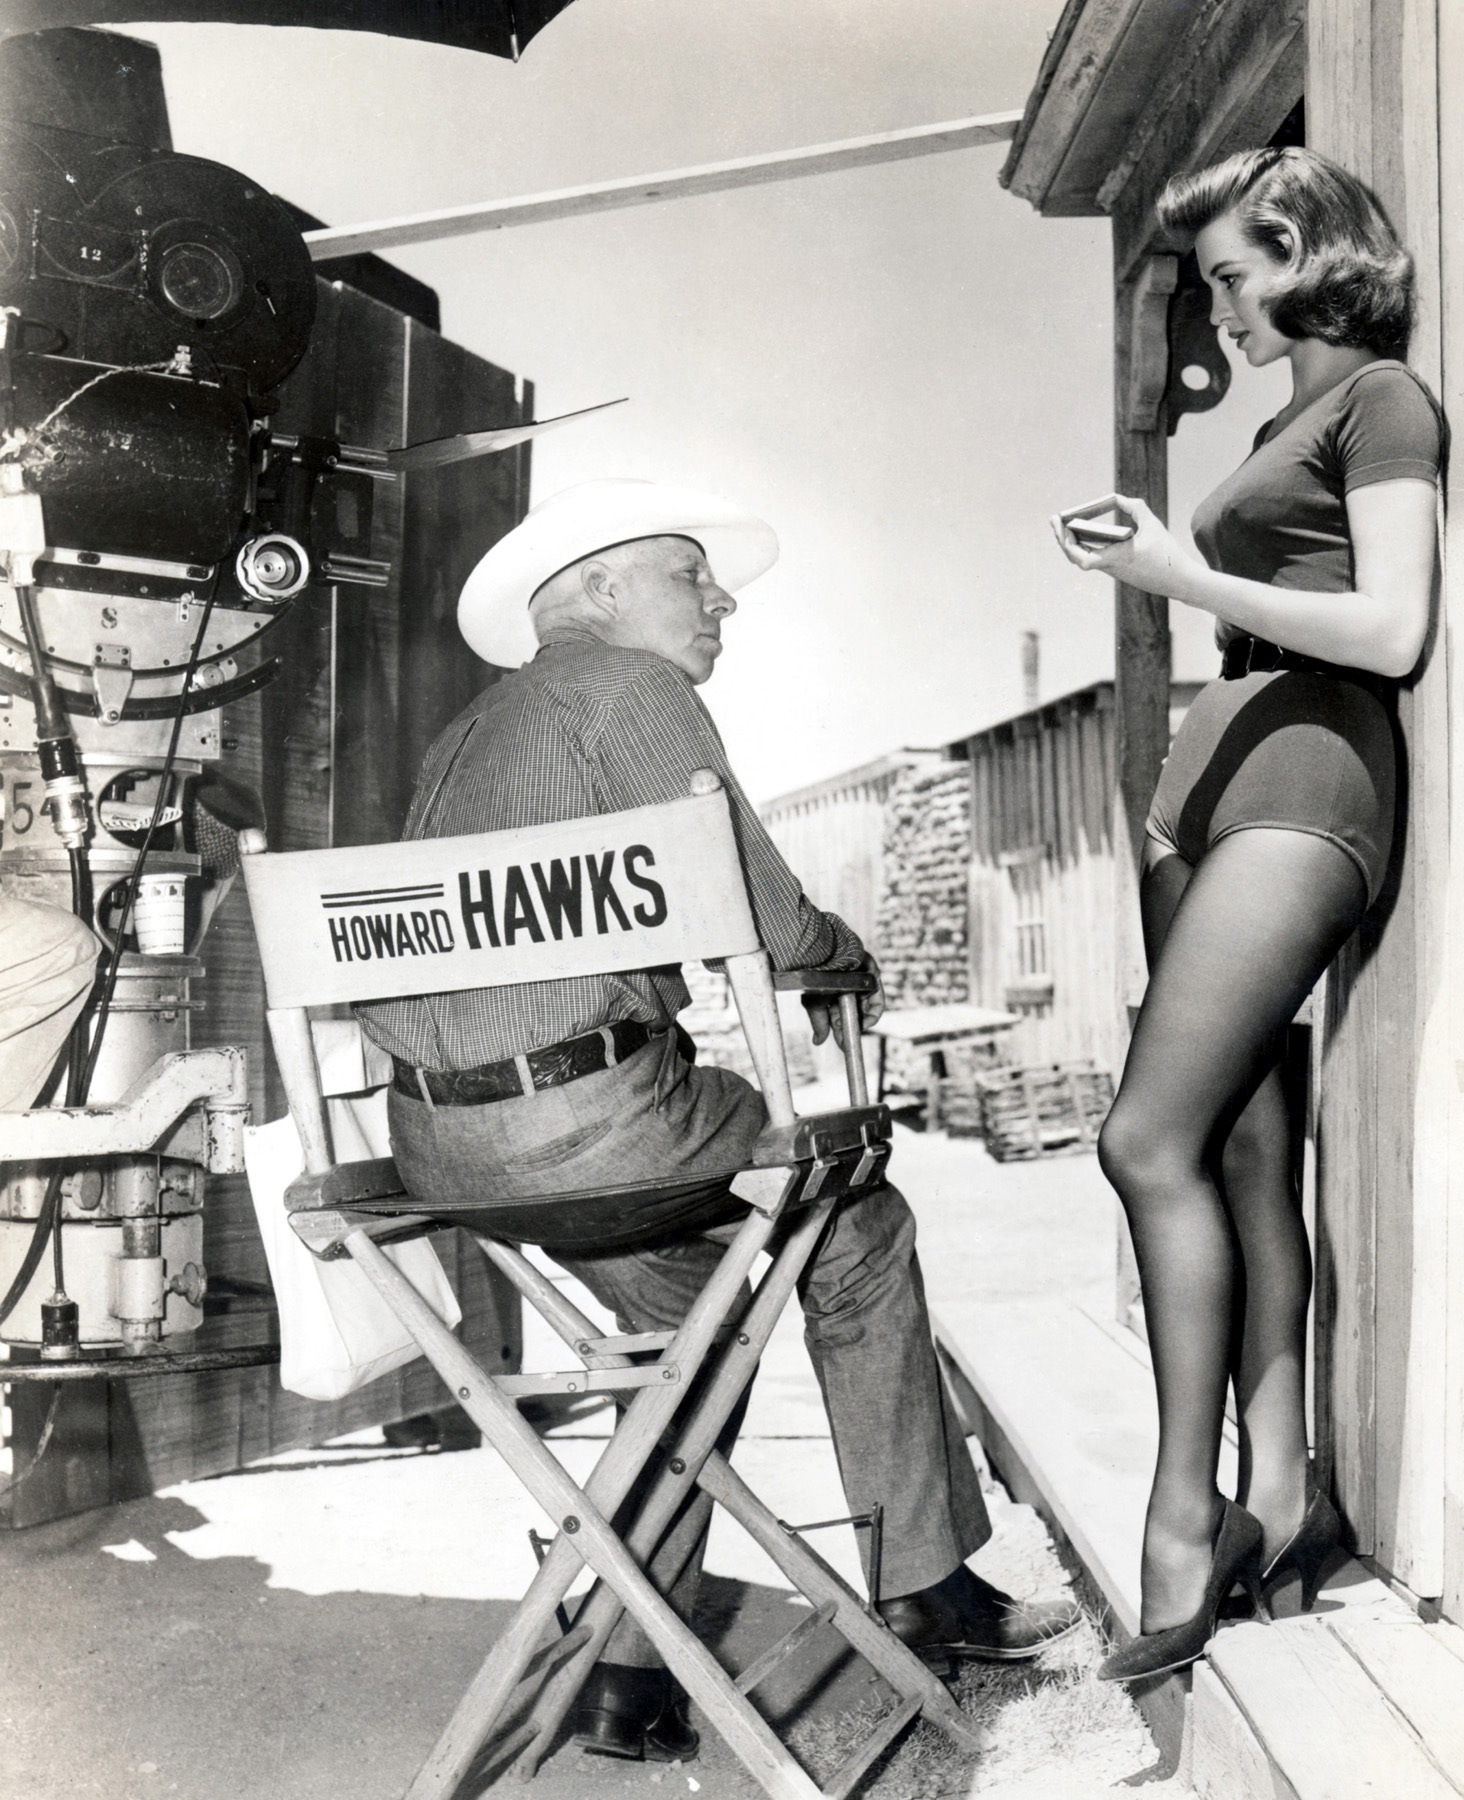 Angie Dickinson and Howard Hawks on the set of Rio Bravo, 1959.